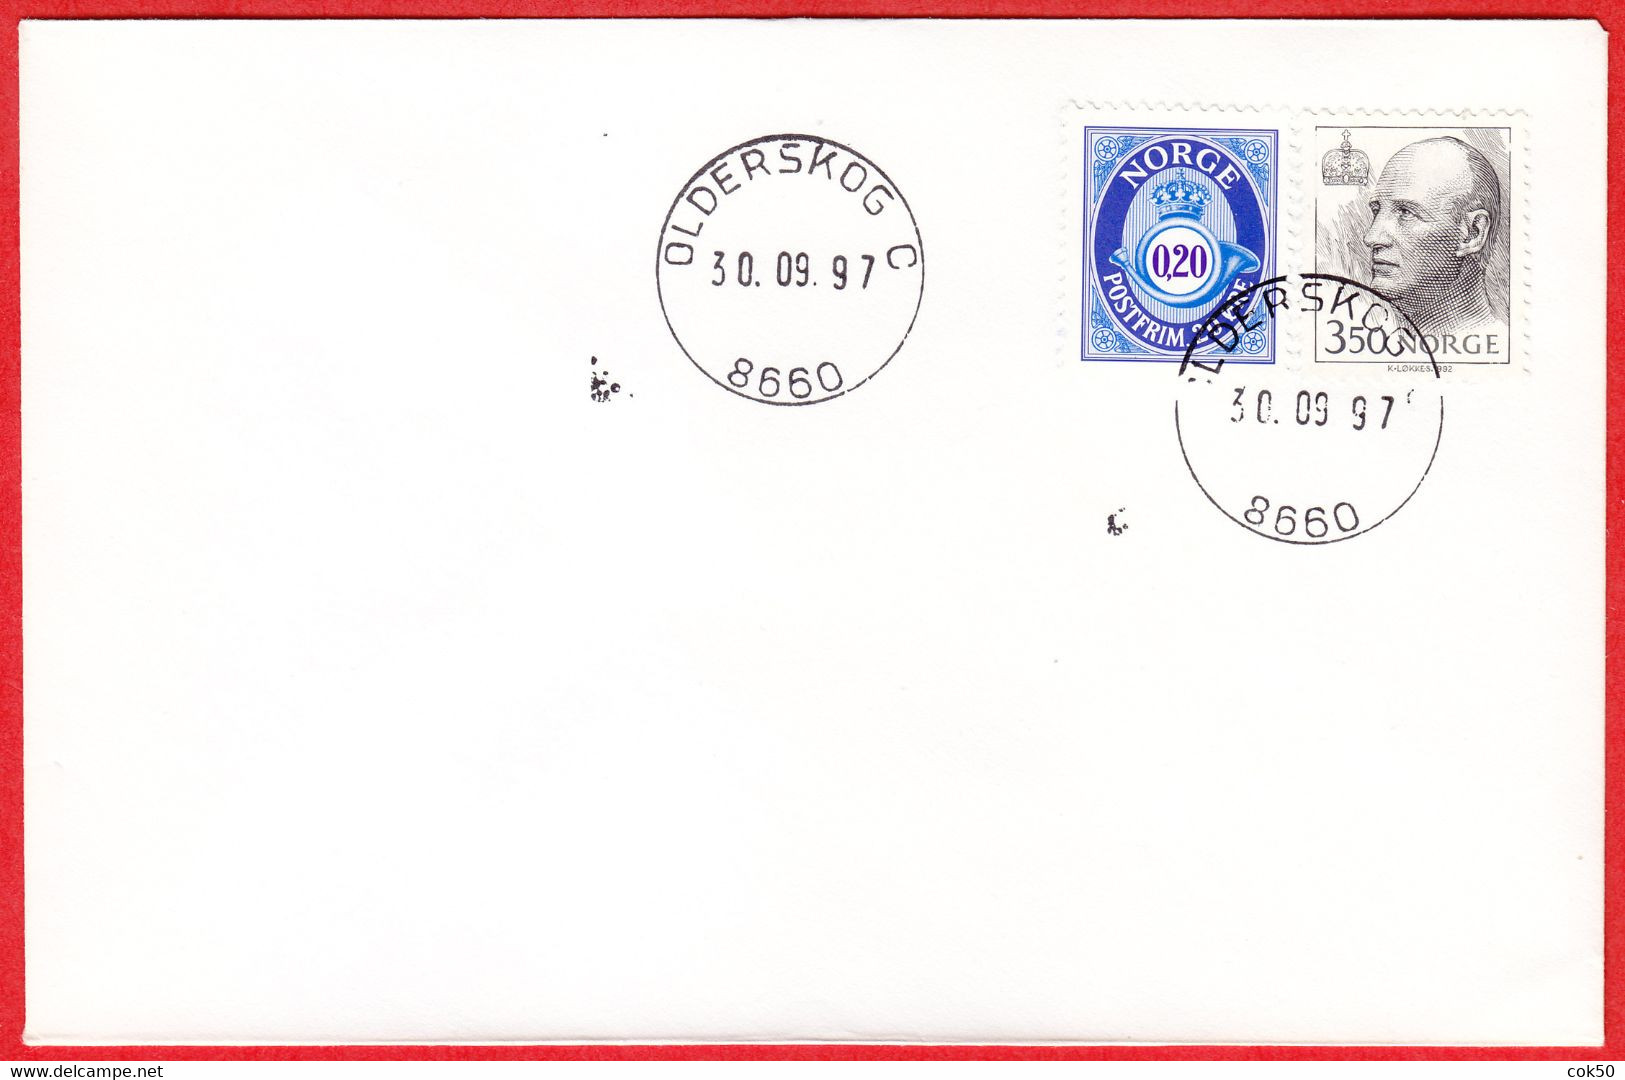 NORWAY -  8660 OLDERSKOG C - 24 MmØ - (Nordland County) - Last Day/postoffice Closed On 1997.09.30 - Local Post Stamps